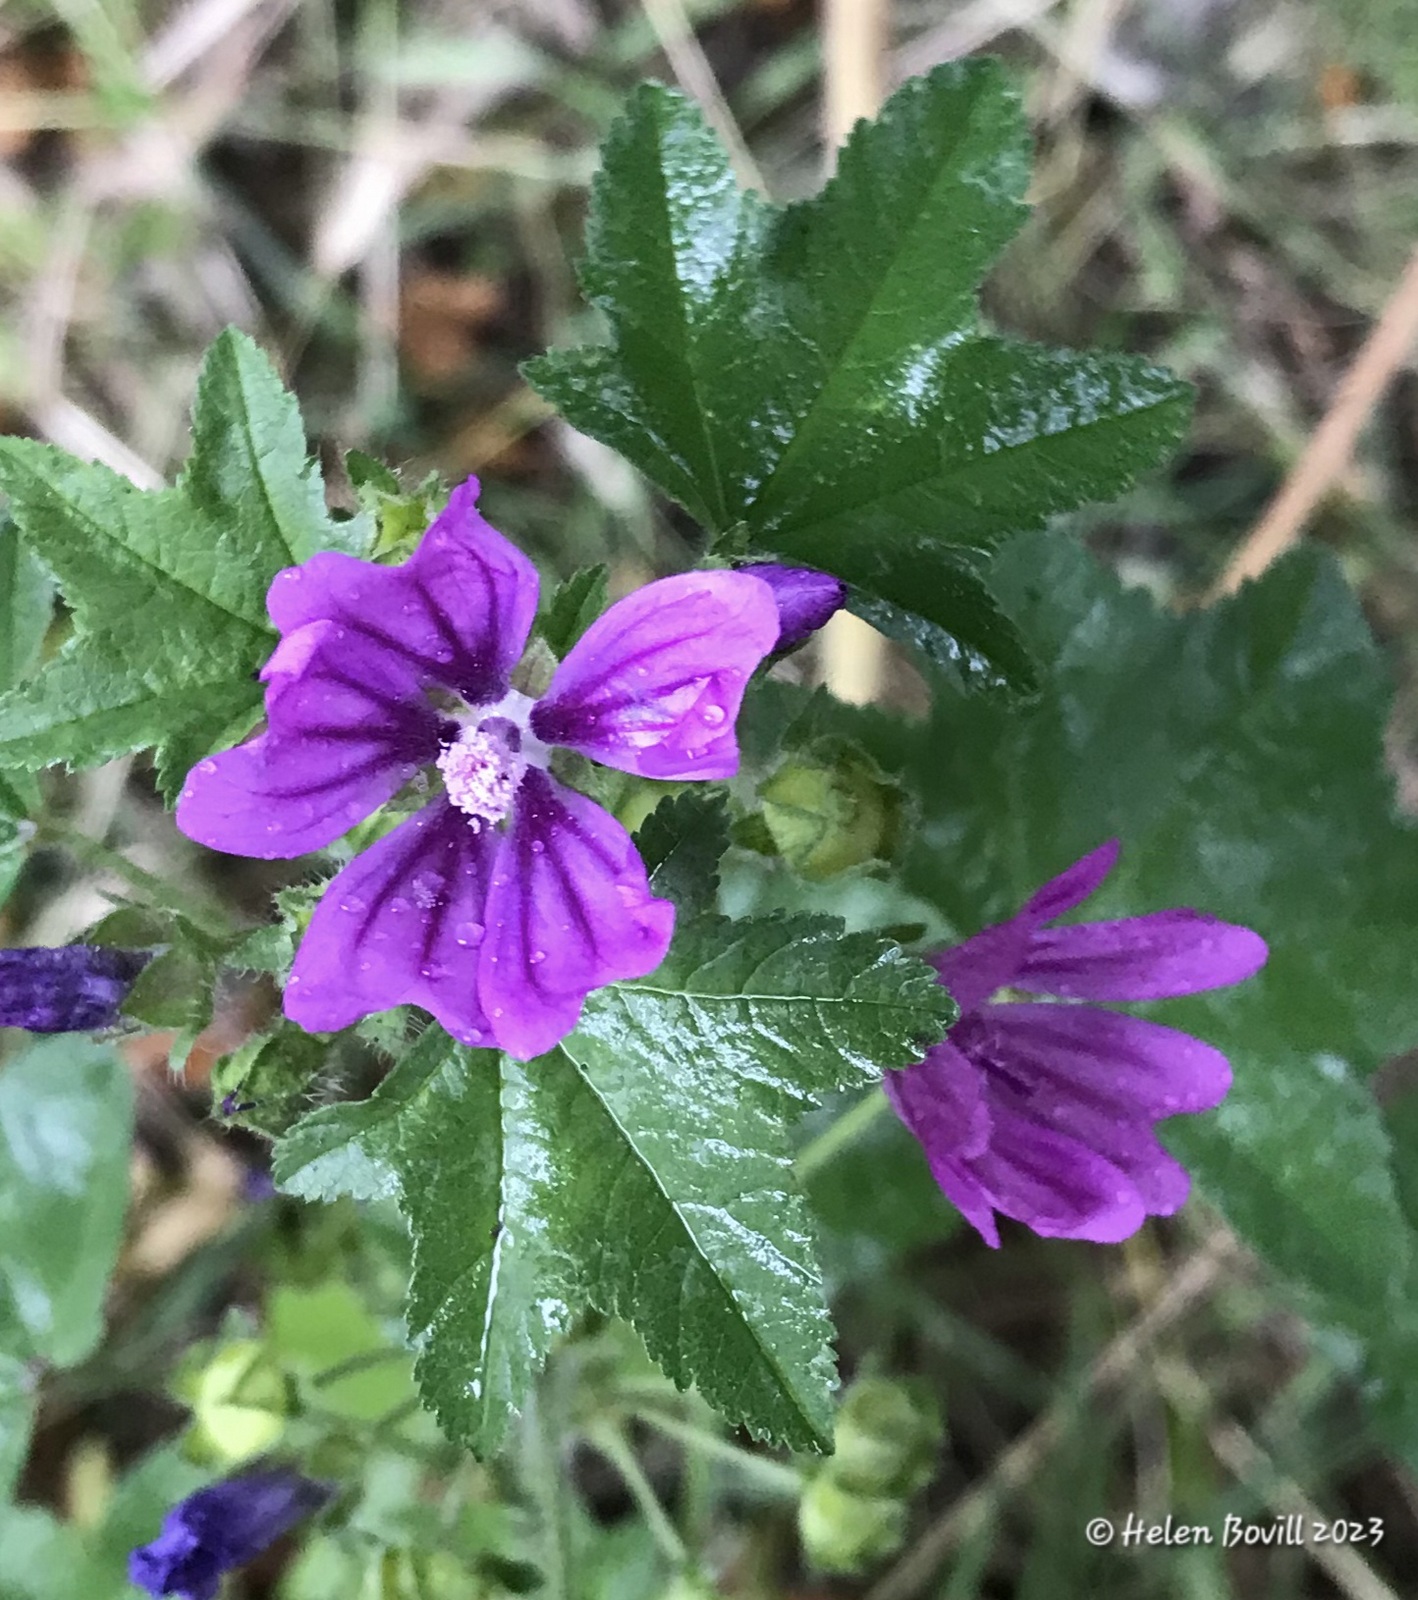 Common Mallow growing in the cemetery